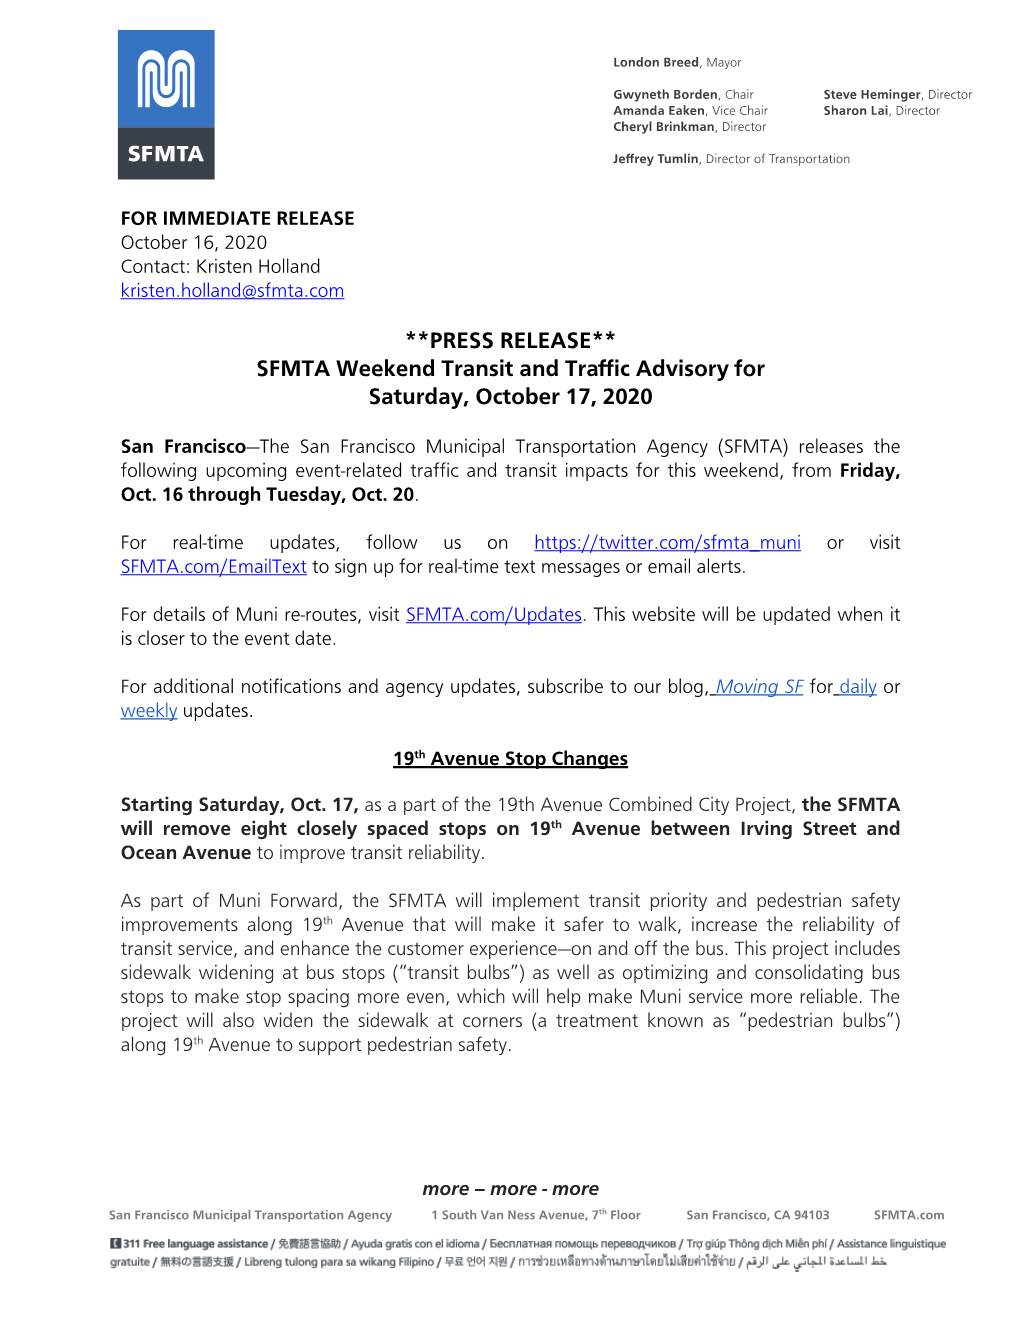 PRESS RELEASE** SFMTA Weekend Transit and Traffic Advisory for Saturday, October 17, 2020